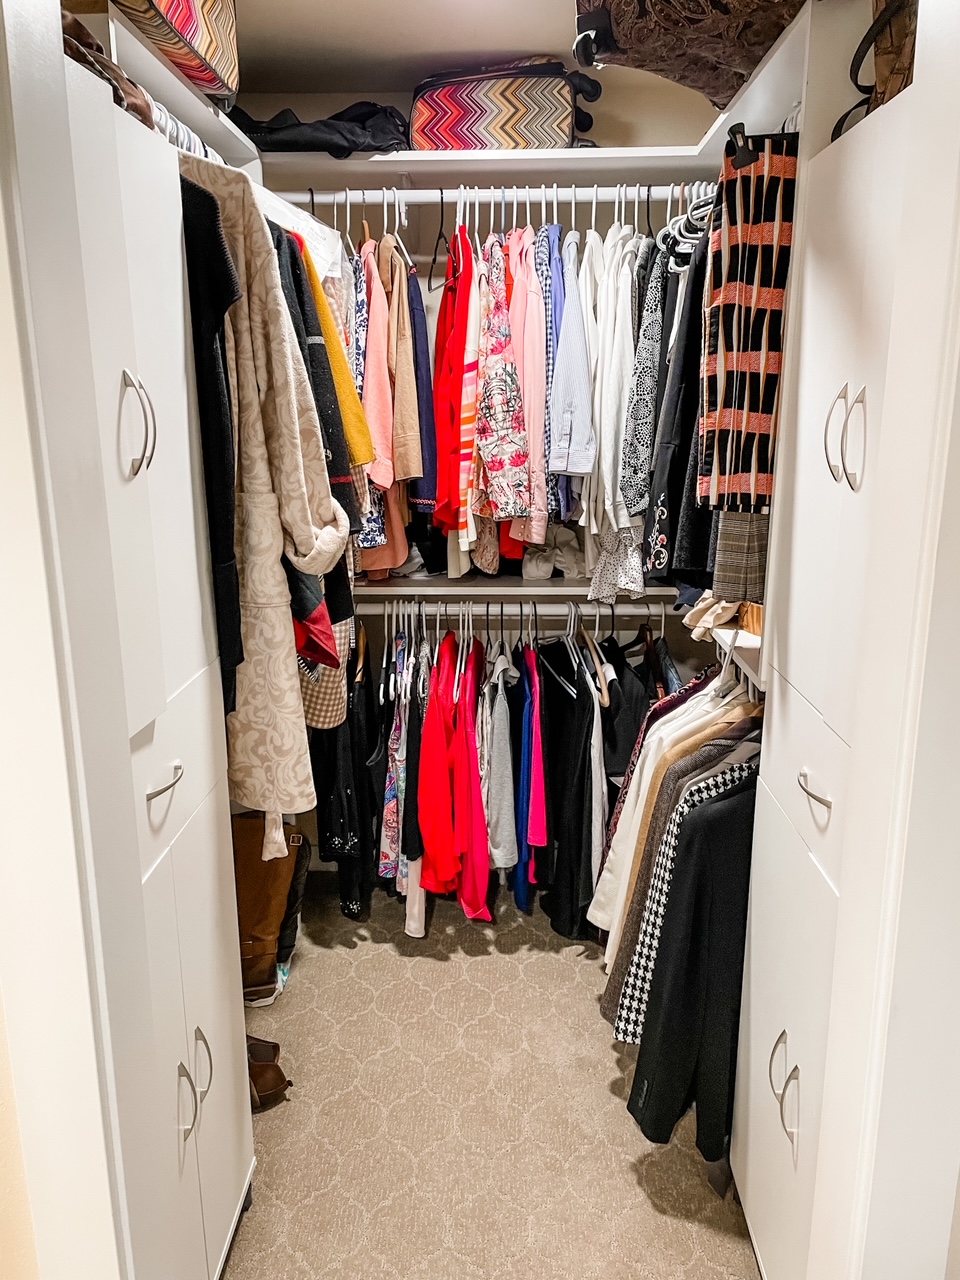 The other closet with more hanging space and cabinets